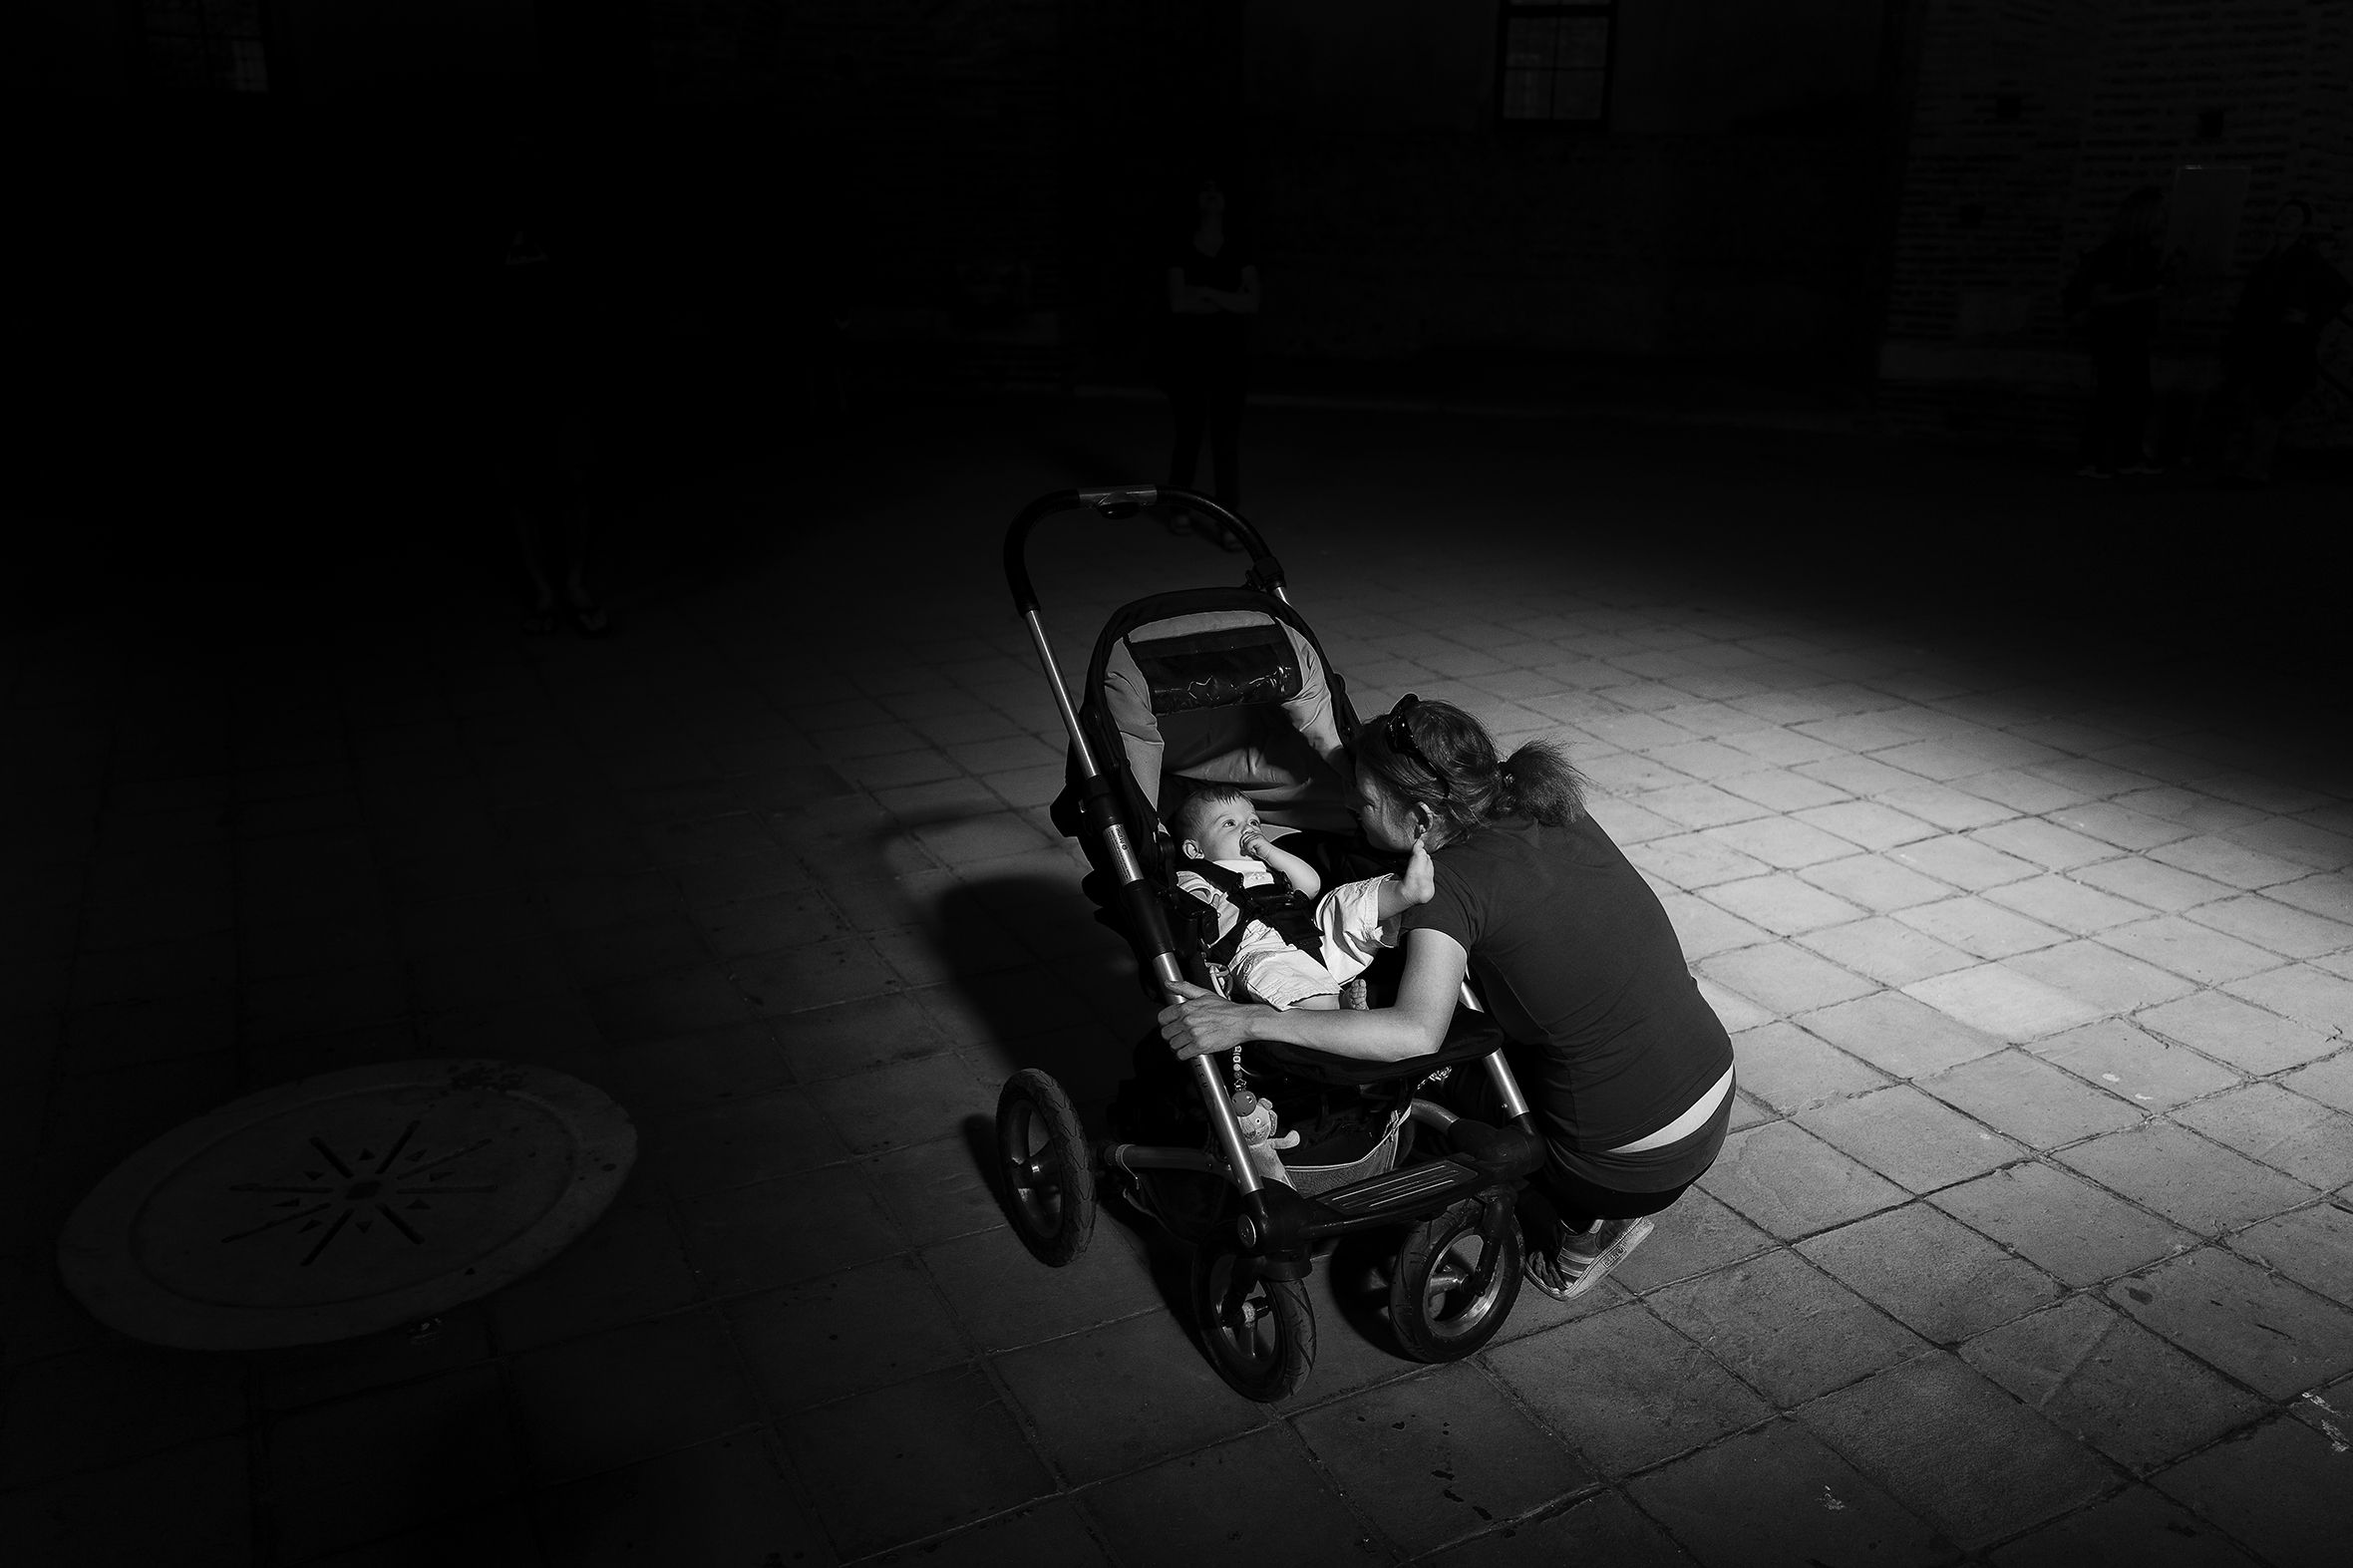 A woman bending down to look at a baby in a stroller. They are surrounded by a vignette, so it is only her and the baby cast in light.